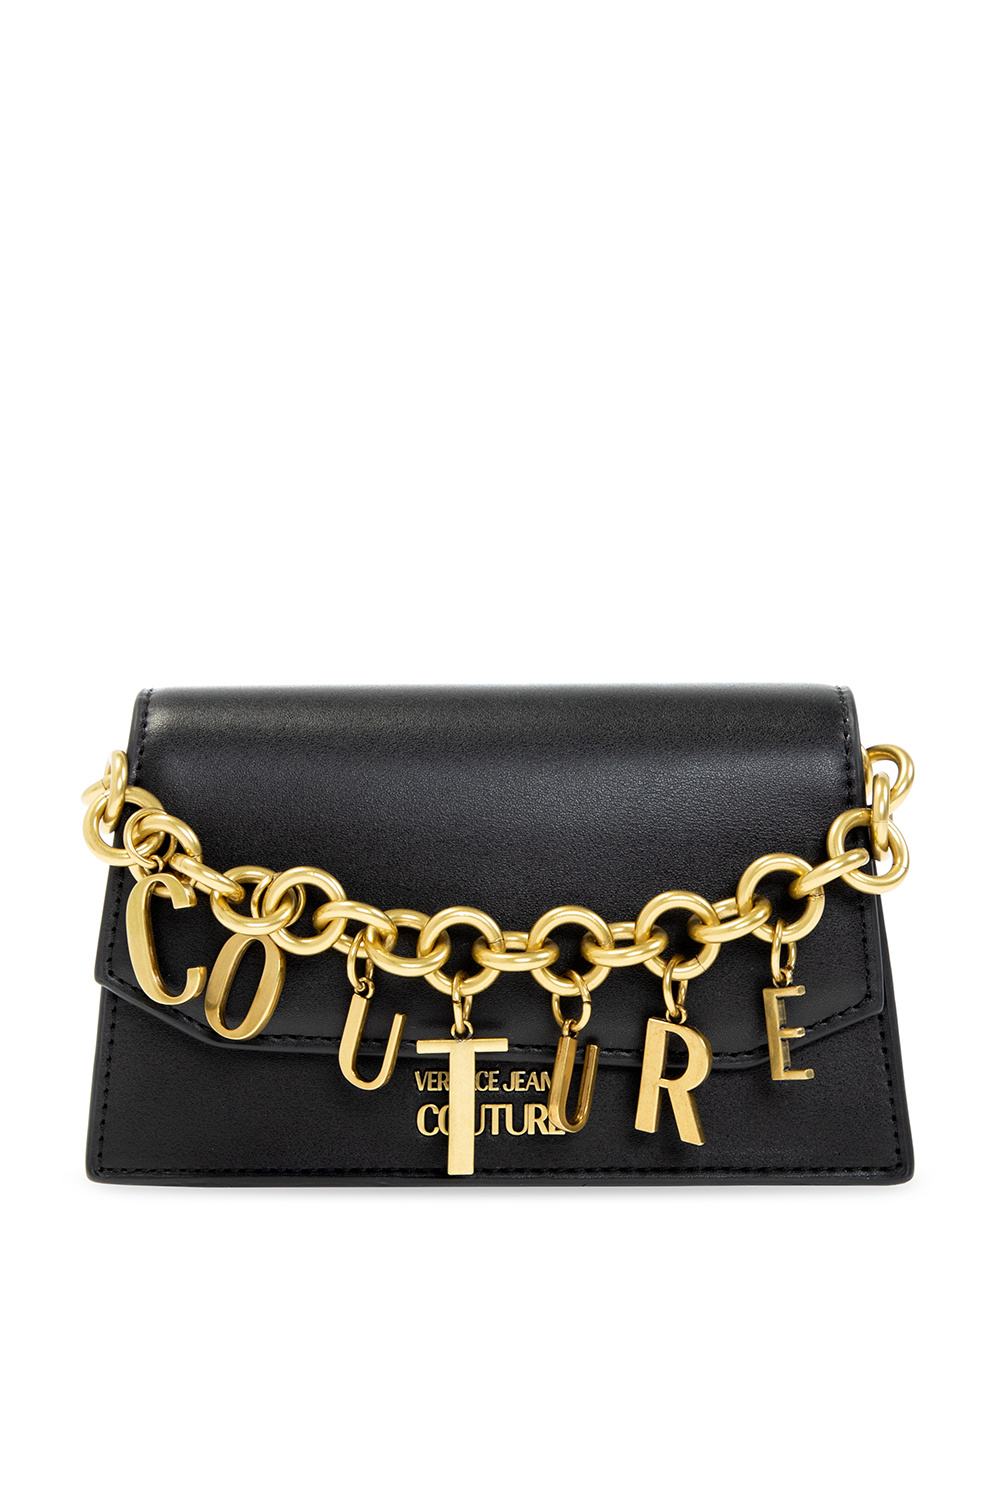 Versace Jeans Couture Chain Couture Tote Bag In Black